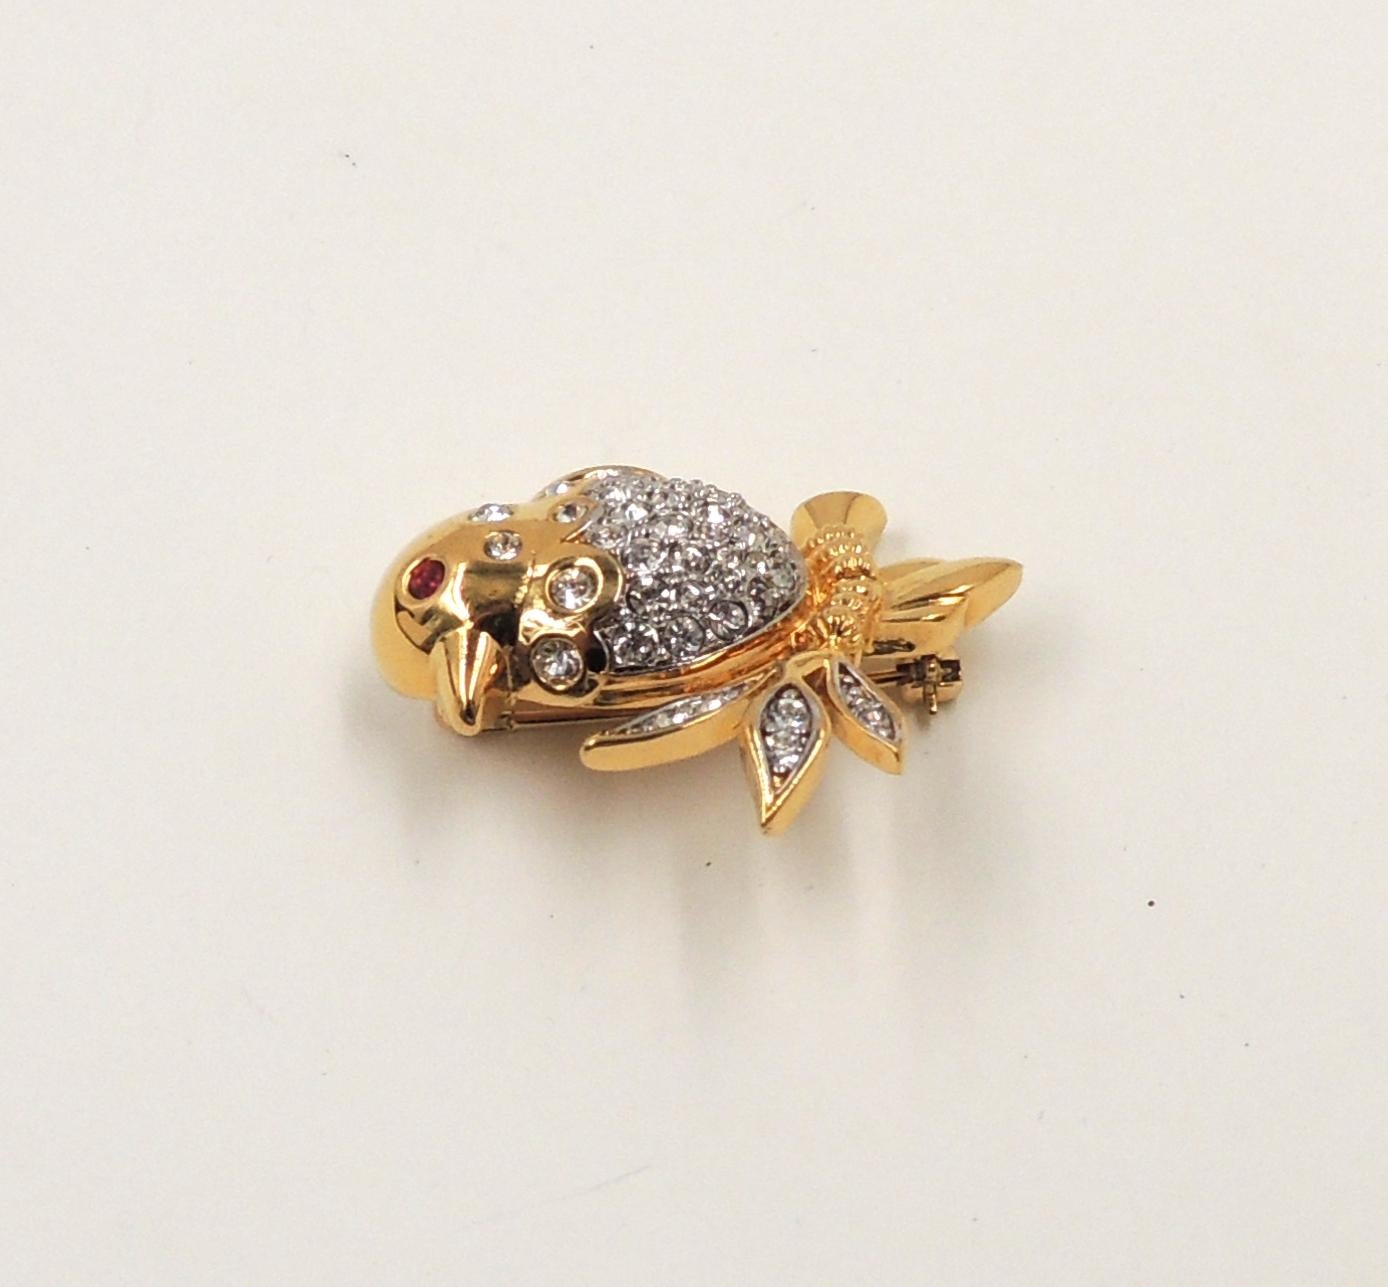 1980s gold plated pave clear rhinestone with faux-garnet eye bird on a branch brooch with security clasp. Marked 